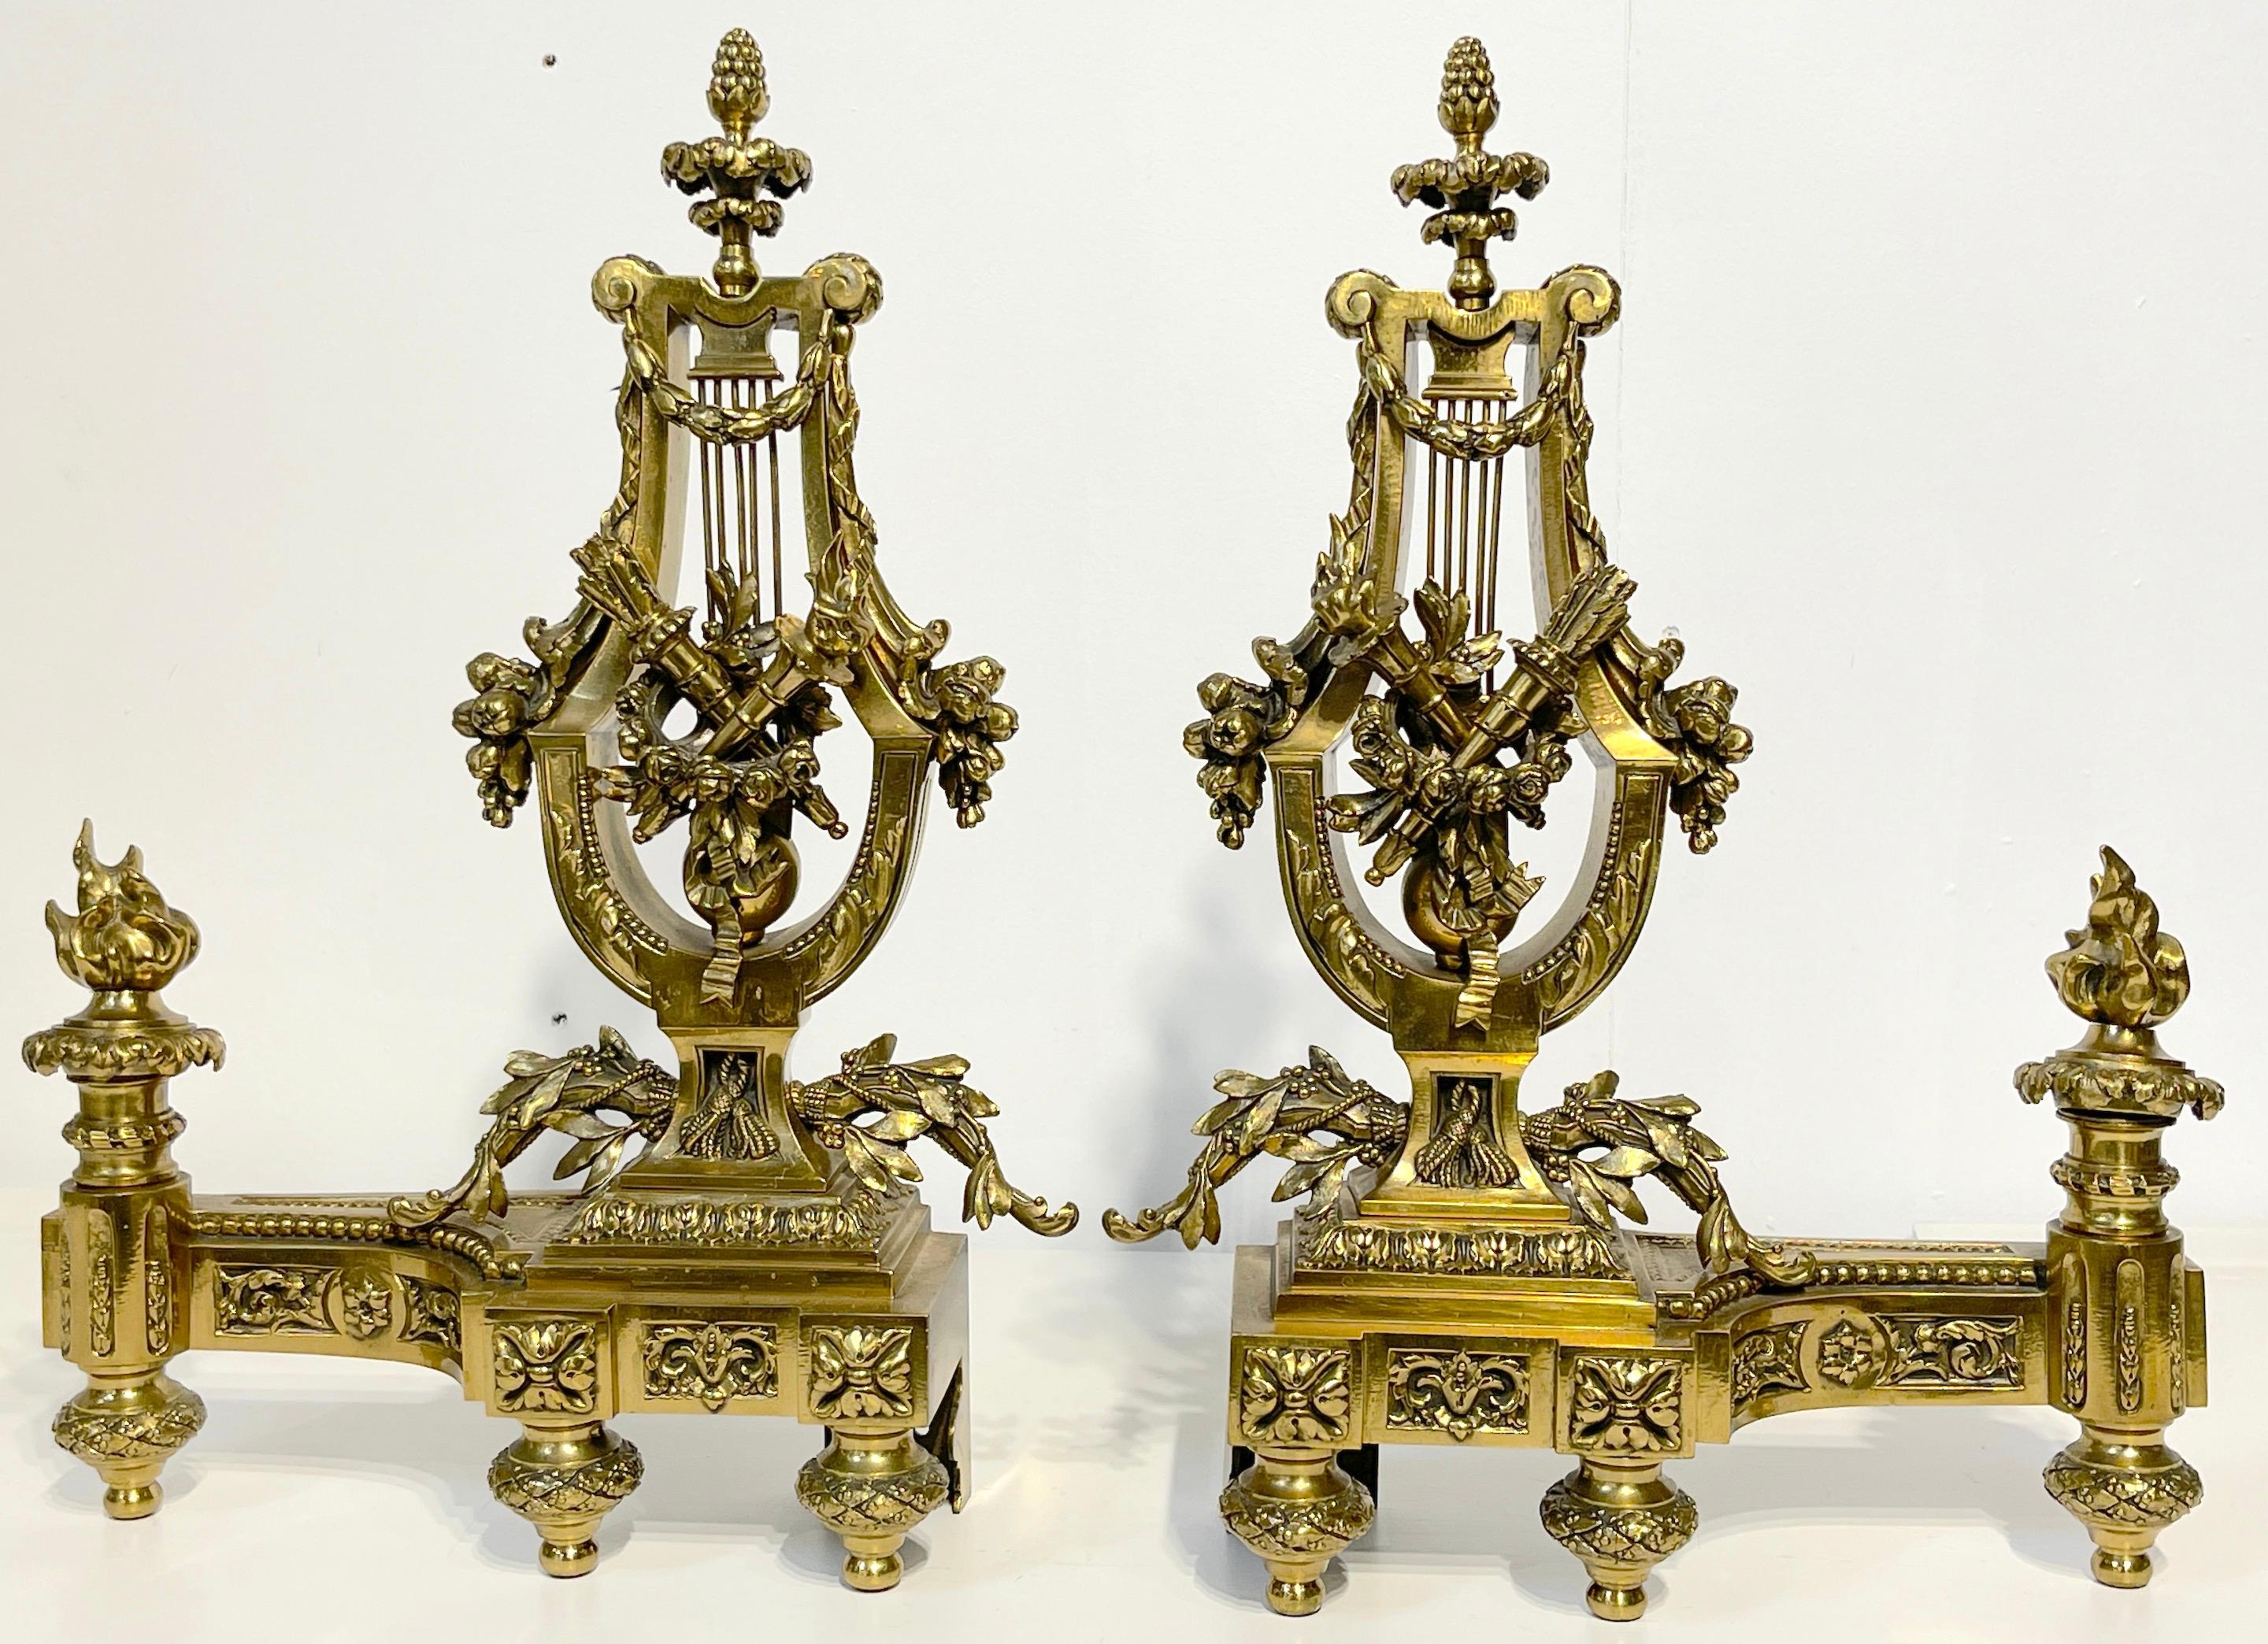 A pair of Louis XVI style French gilt bronze Lyre chenets/andirons, Signed V.B.
France, Circa 1890s
A fine pair of Louis XVI Neoclassical style Chenets/Andirons, Each one with finely casting the top with Acorn finial, with a fruit and flower